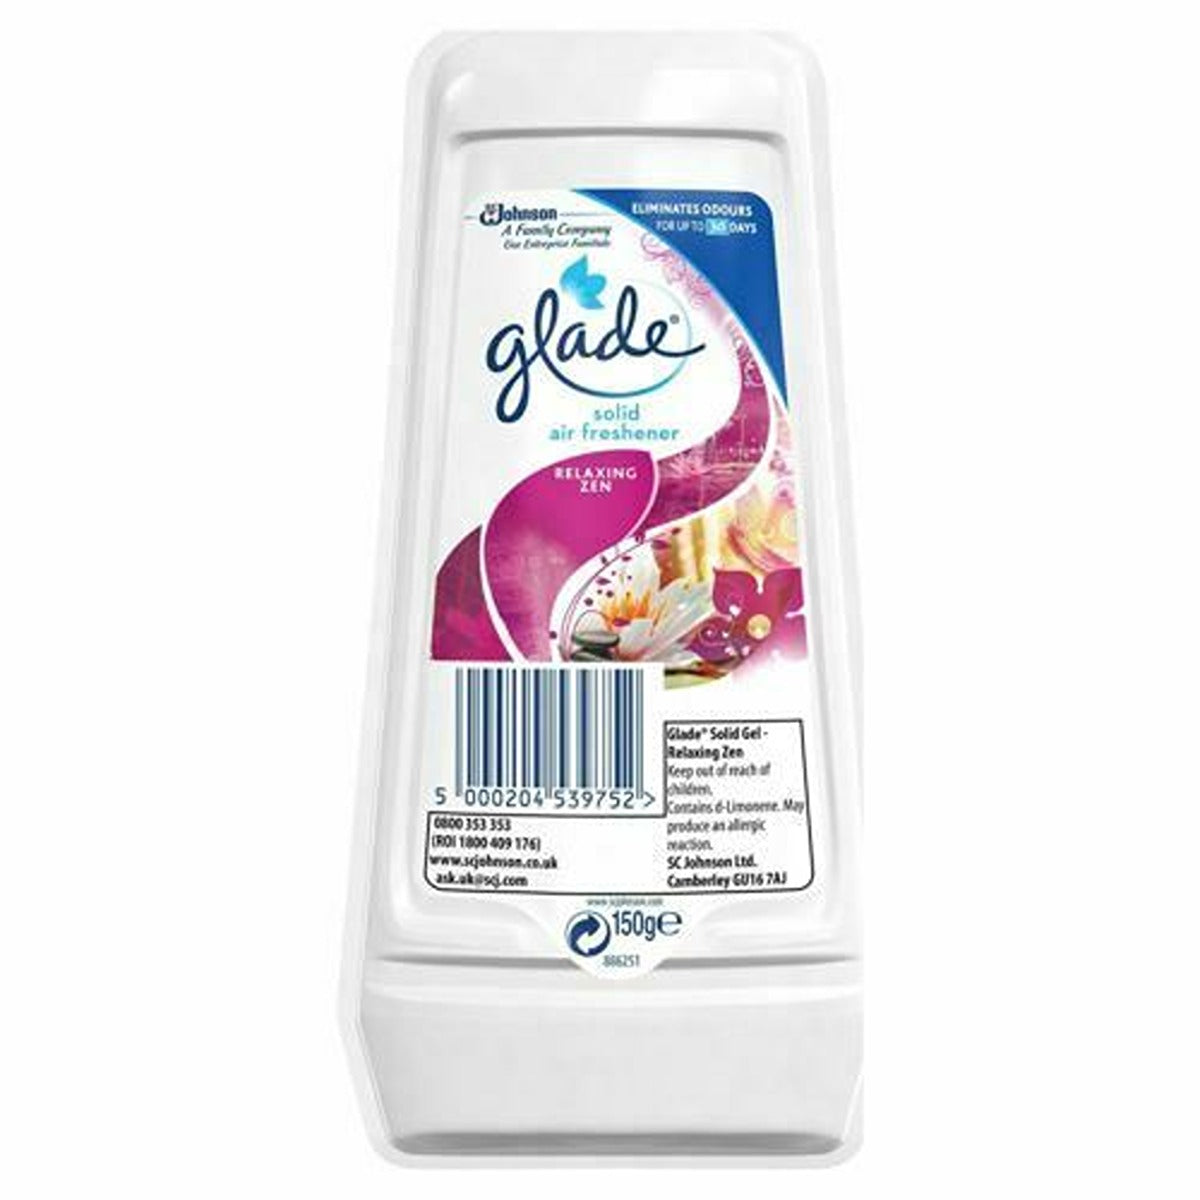 A bottle of Glade hand sanitizer on a white background.